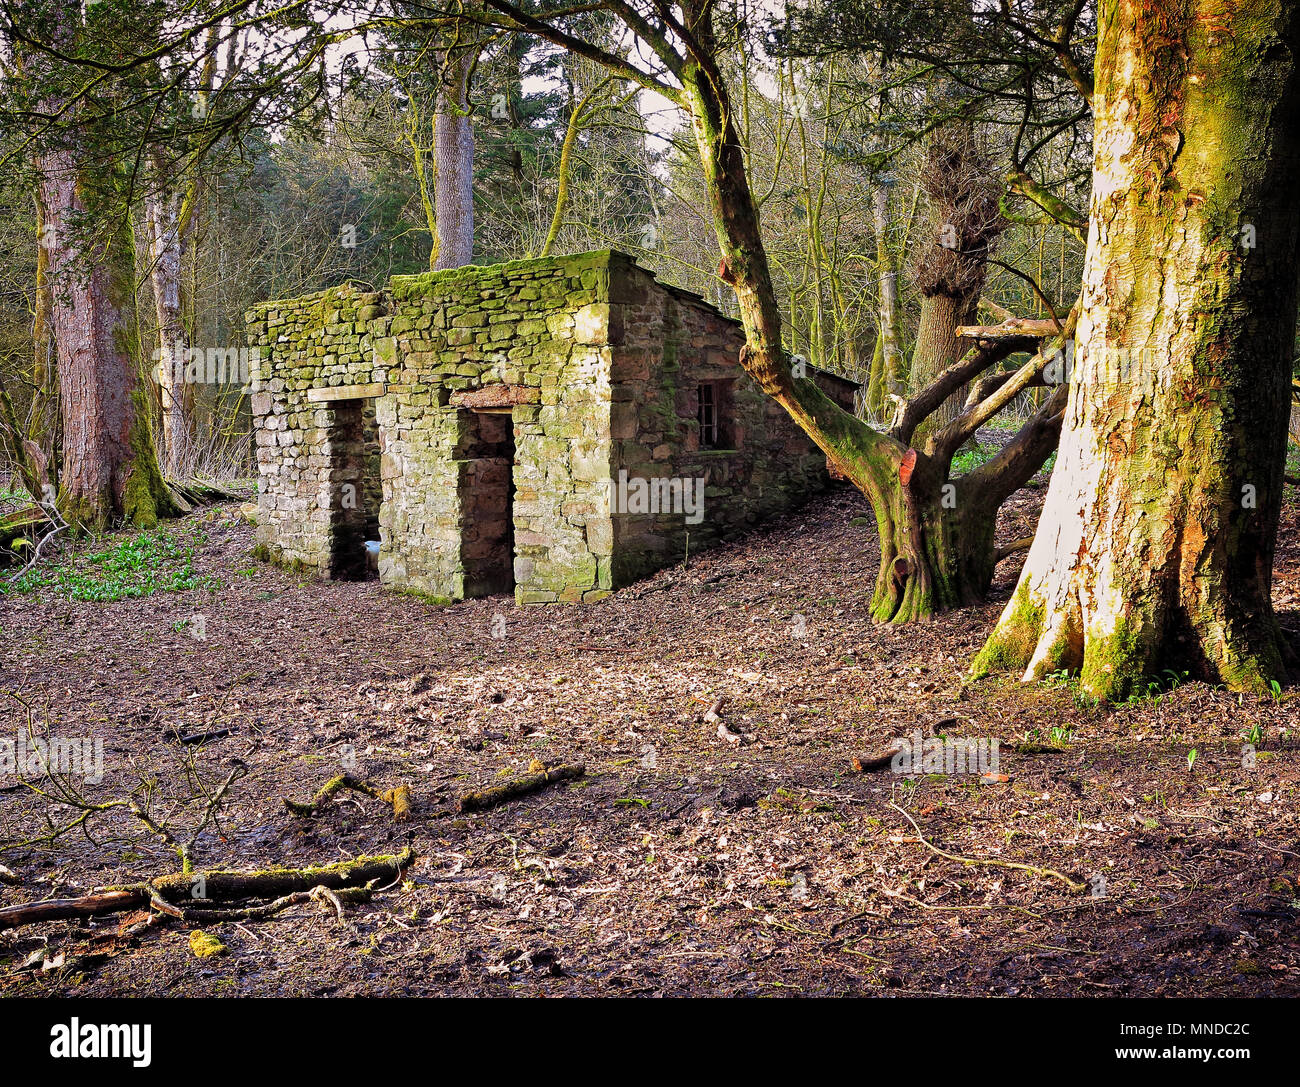 A ruin situated in picturesque woodland, at Strid Woods, Bolton Abbey, Yorkshire Dales Stock Photo